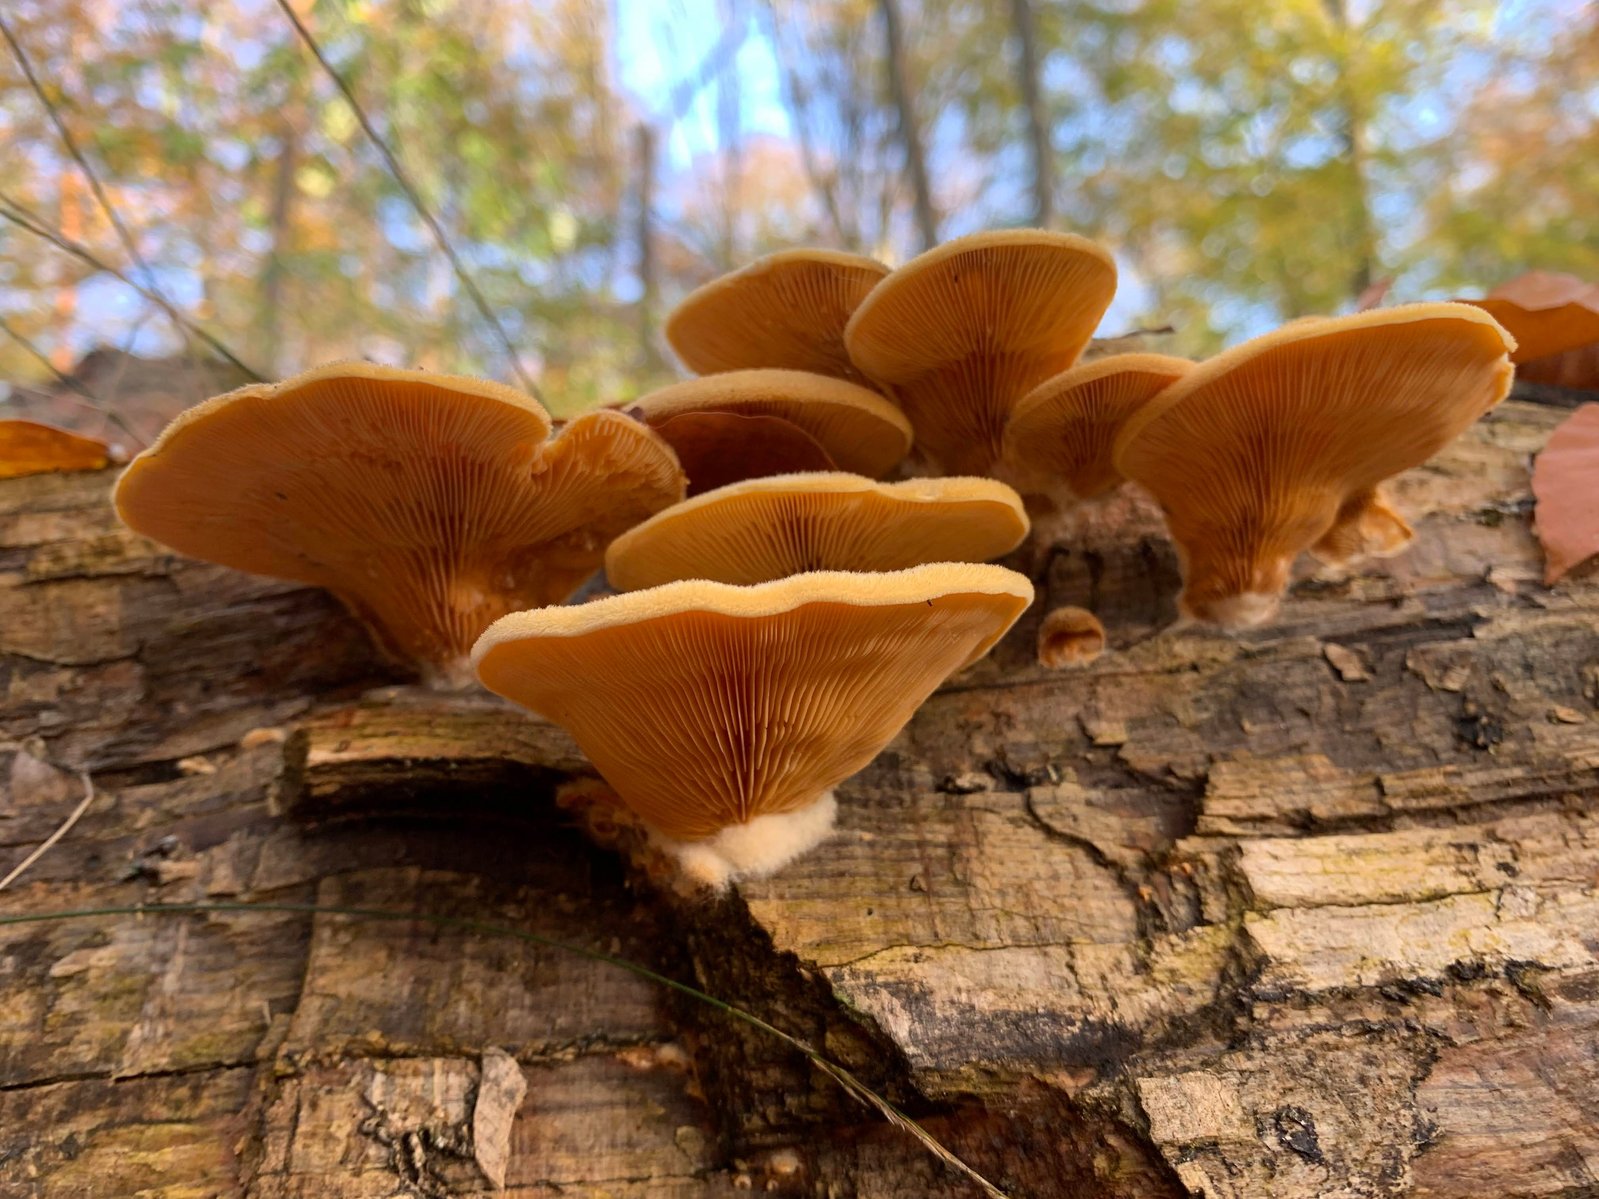 Vibrant yellow-orange gilled mushrooms growing from a log, showcasing their unique beauty when viewed from underneath.